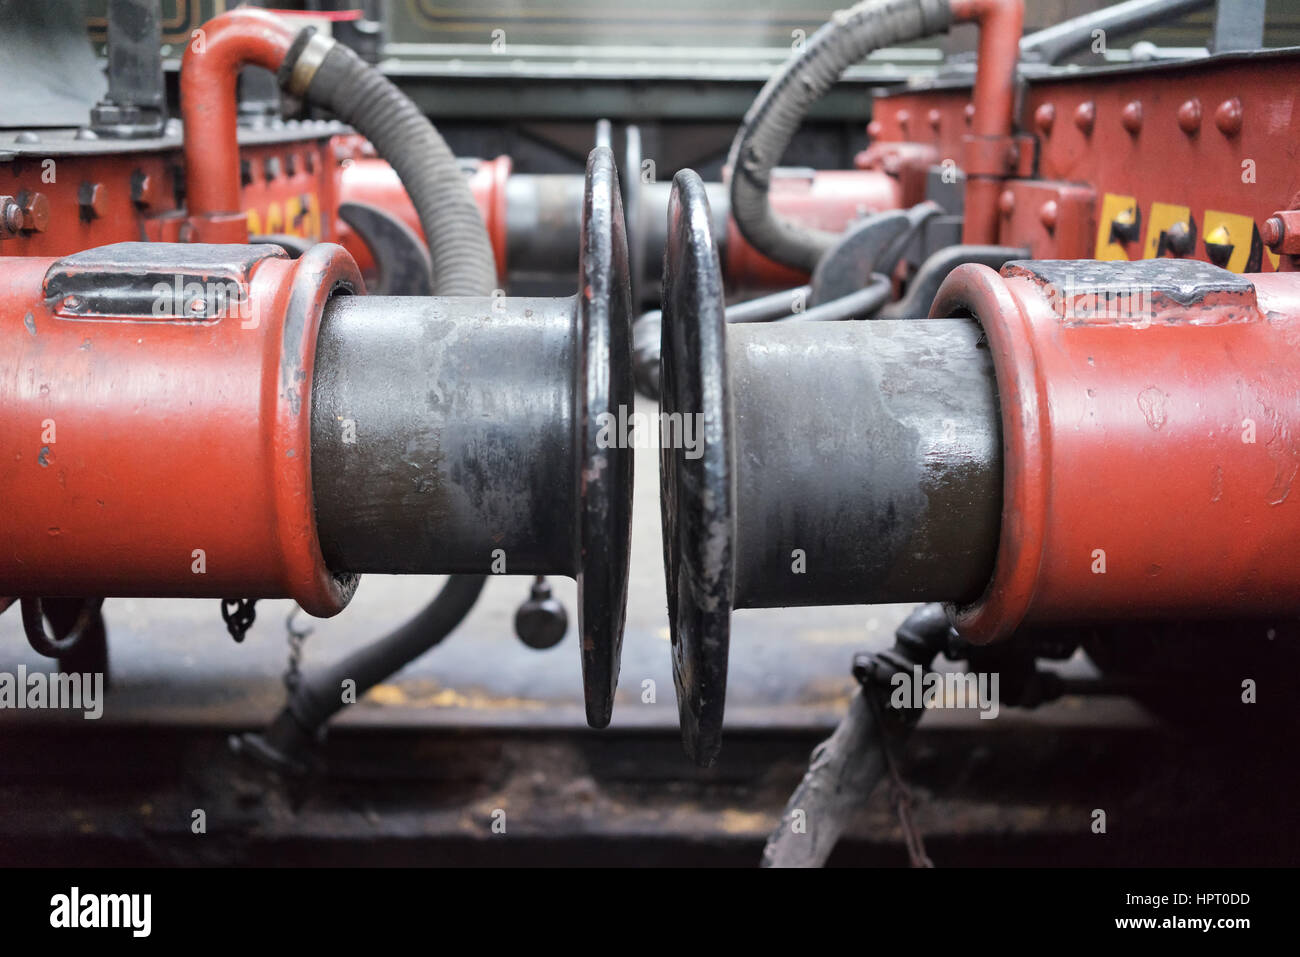 Heritage train buffers joined together Stock Photo